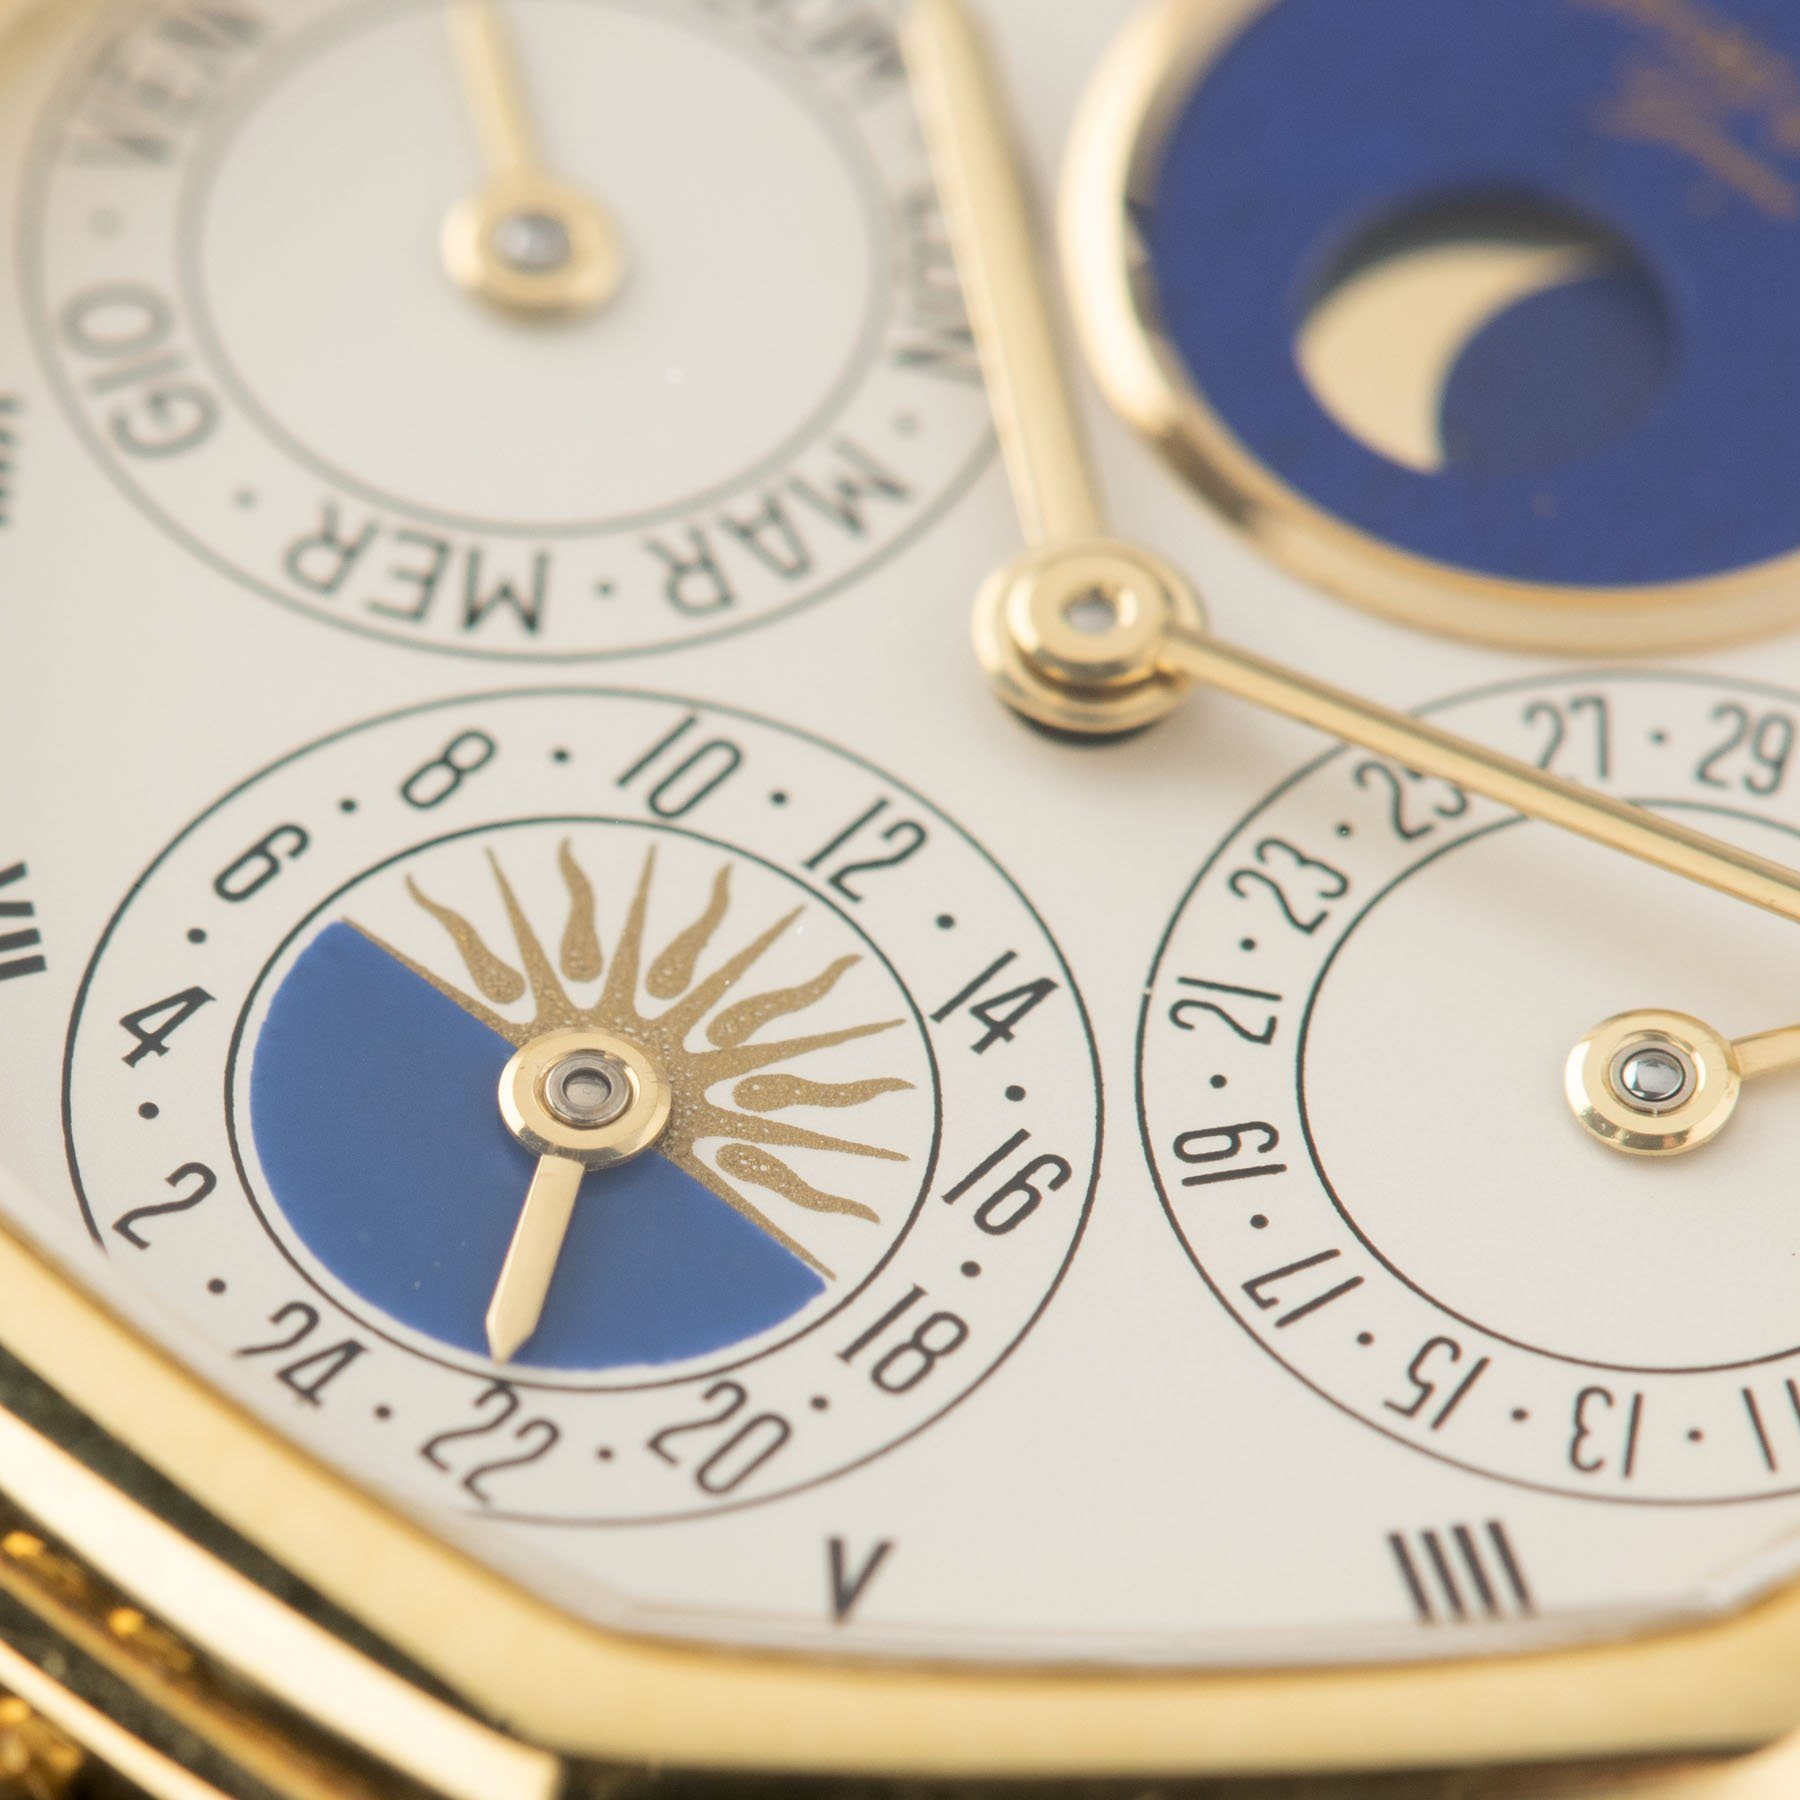 Gerald Genta “Succes“ Day Date Moon Phase Ref 2747